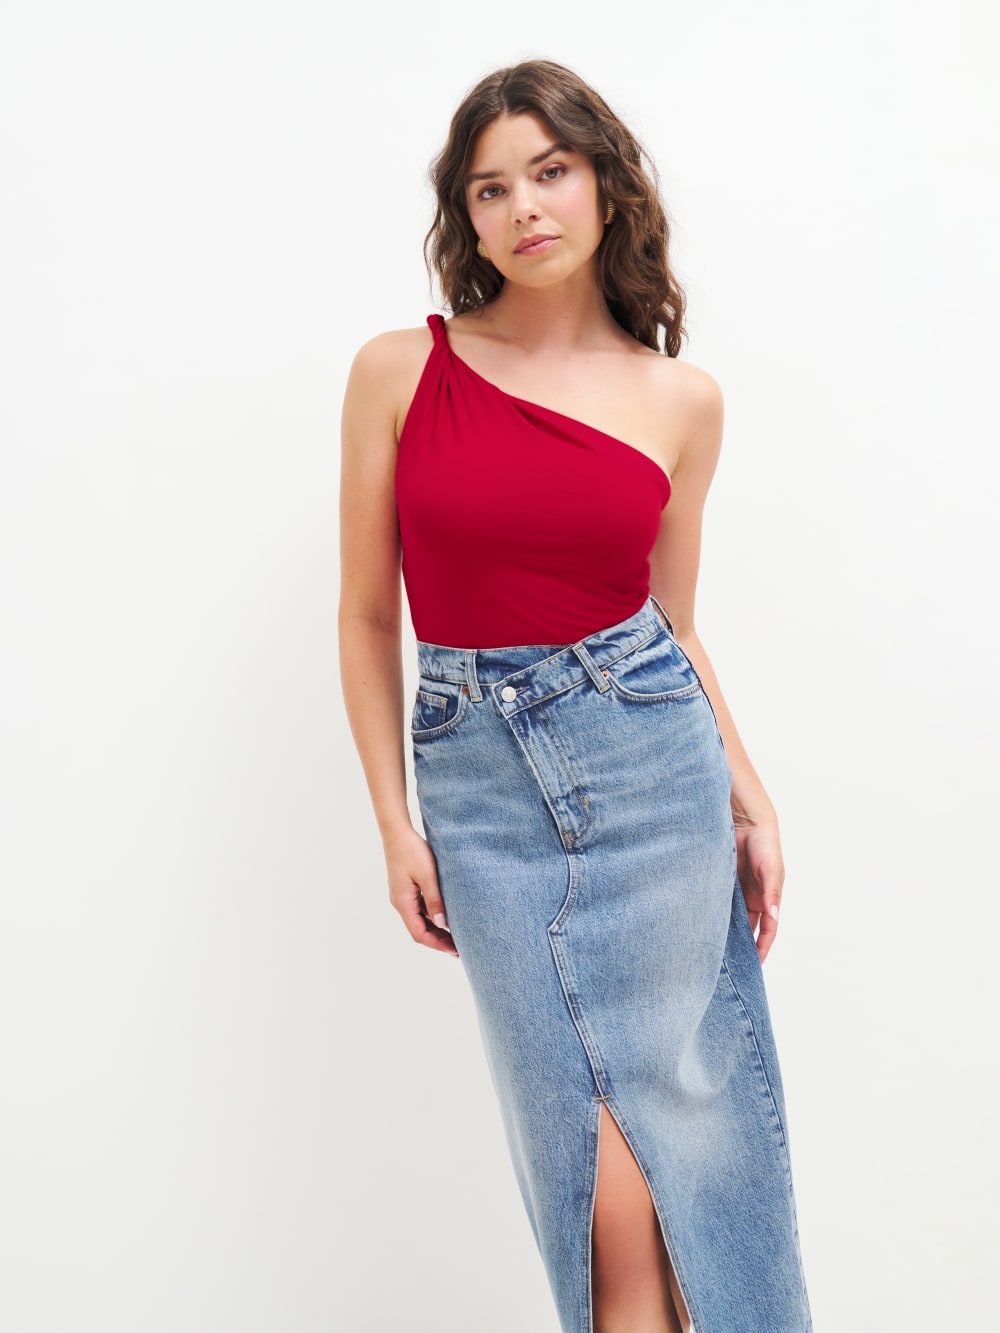 Tap into the red trend this season with Reformation's Sianna knit top in red. It has a one-shoulder neckline with twisted strap detail and a form-fitting silhouette. 